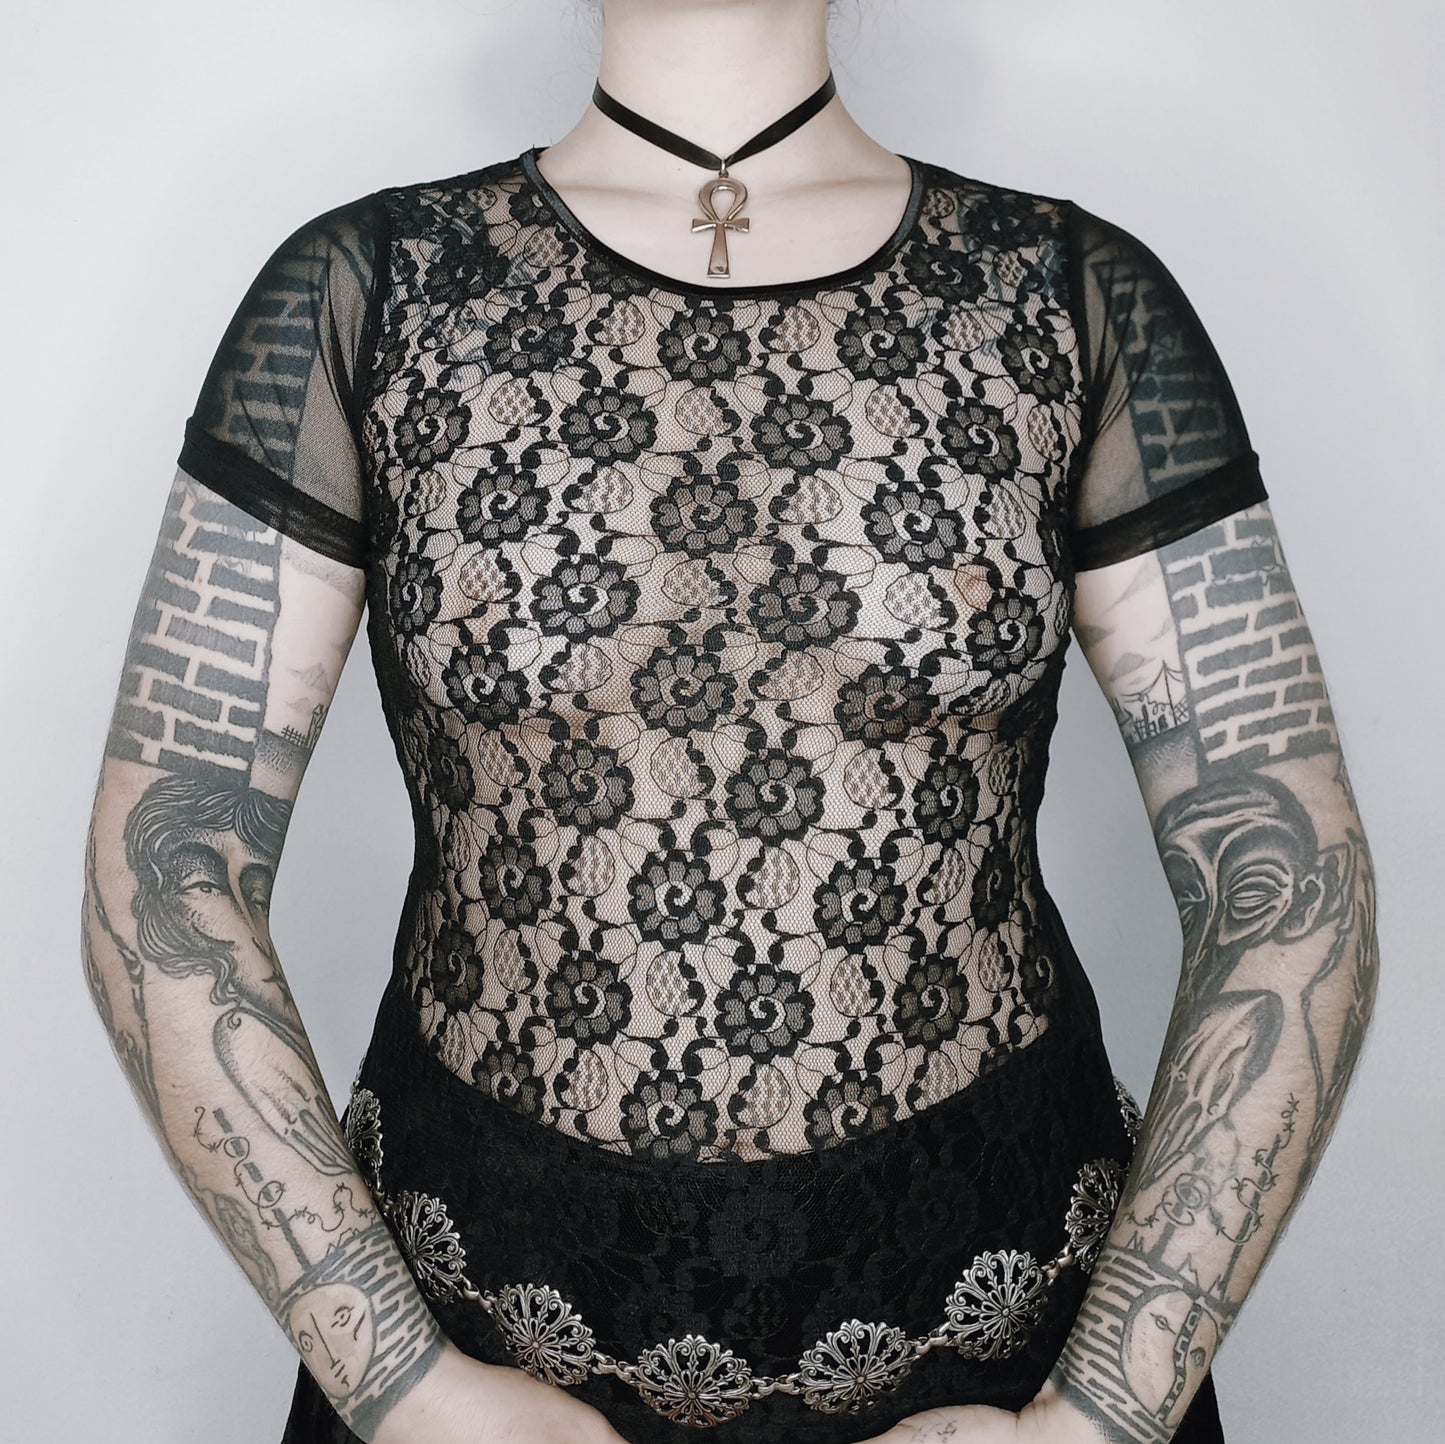 Full Lace Mesh Top - XS/S